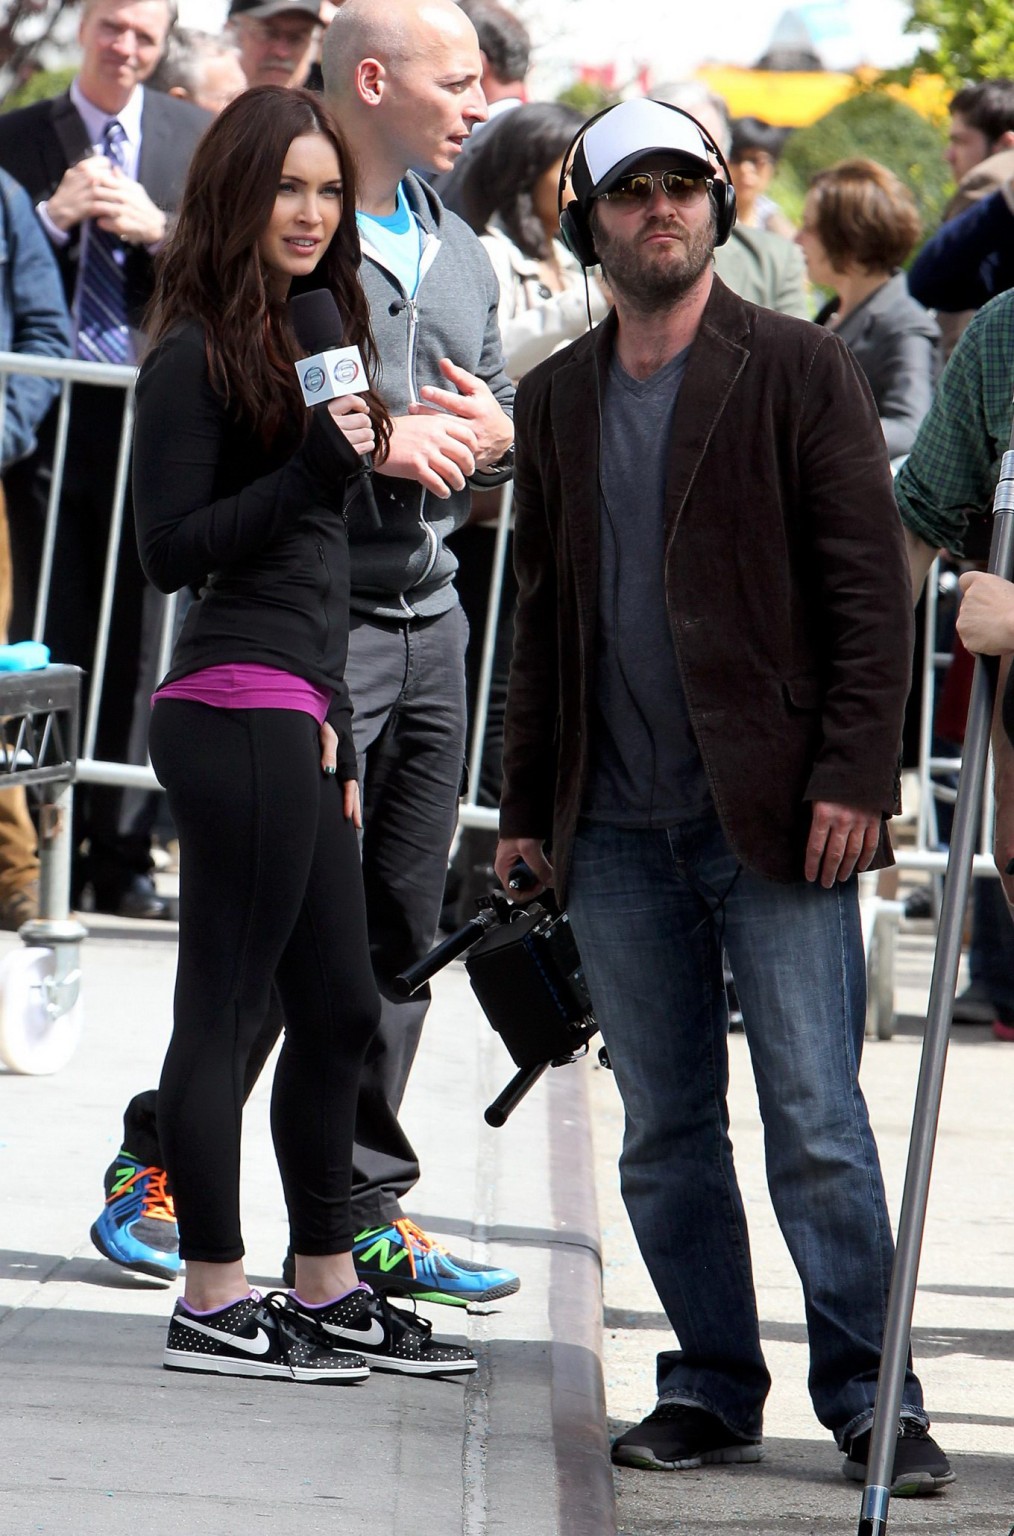 Megan Fox cleavy wearing tight outfit while jumps on trampoline at the TMNT set #75233084